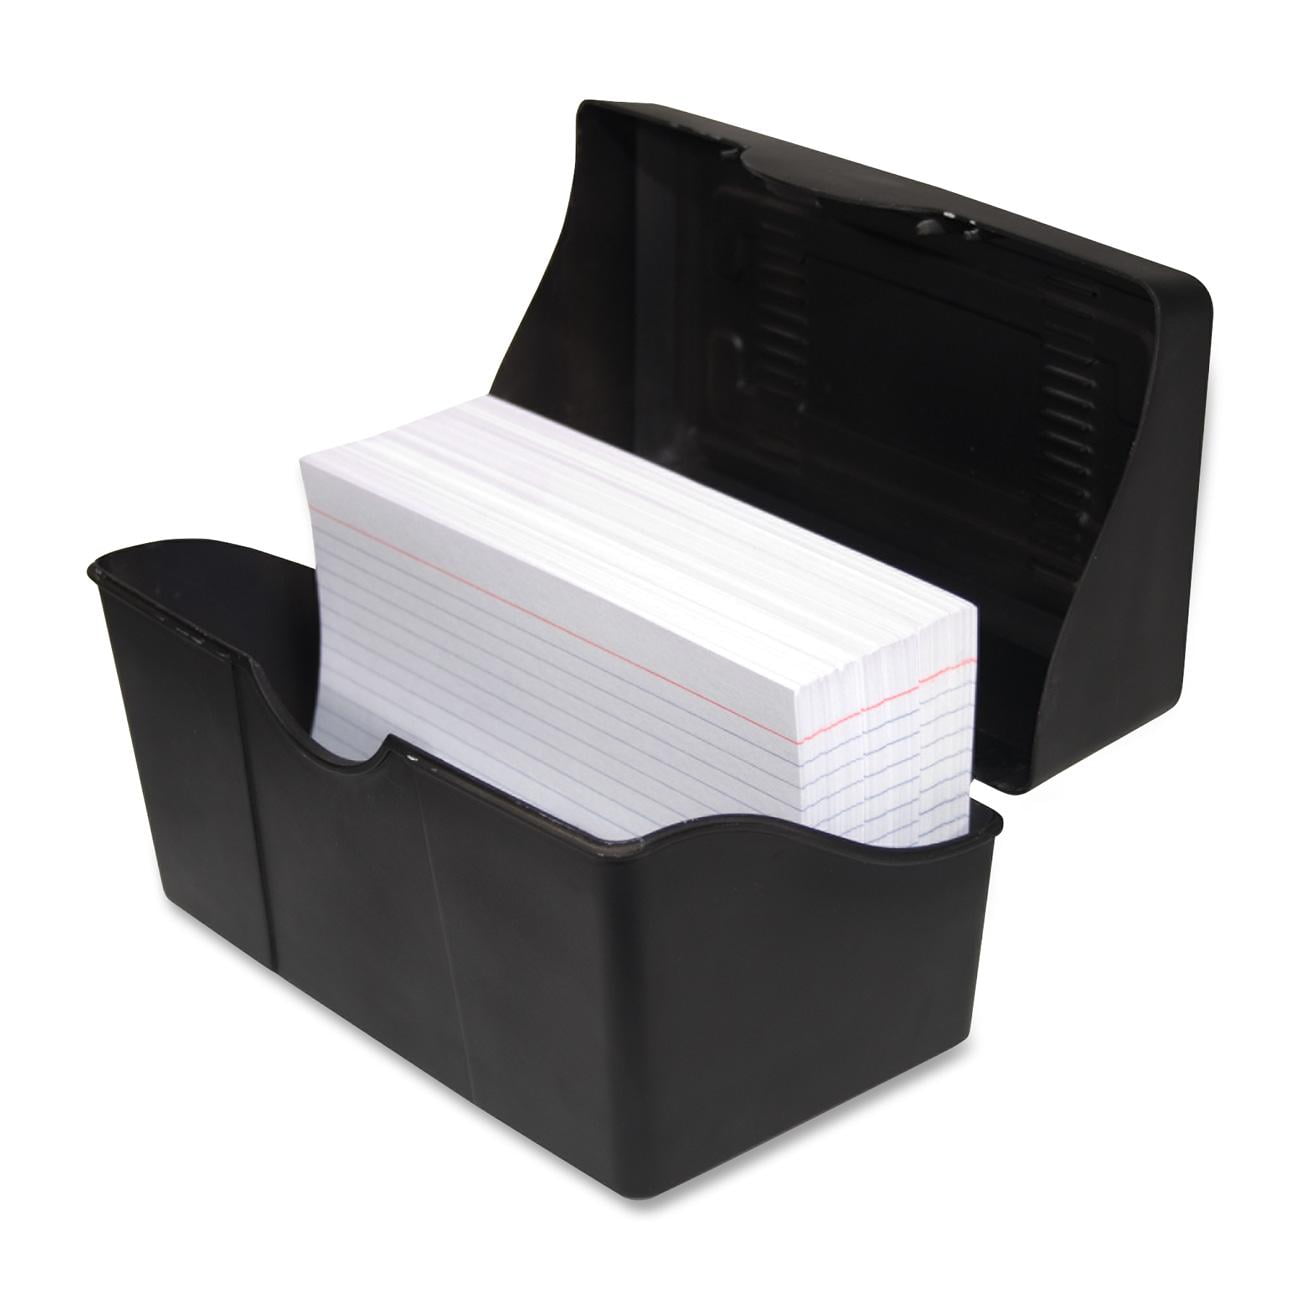 2 Pack or Note Card Storage Boxes Recipe Snap-N-Store Index Card Holder Collapsible Organizer Box fits 1100 5x8-Inch Flash Cards Black Business 